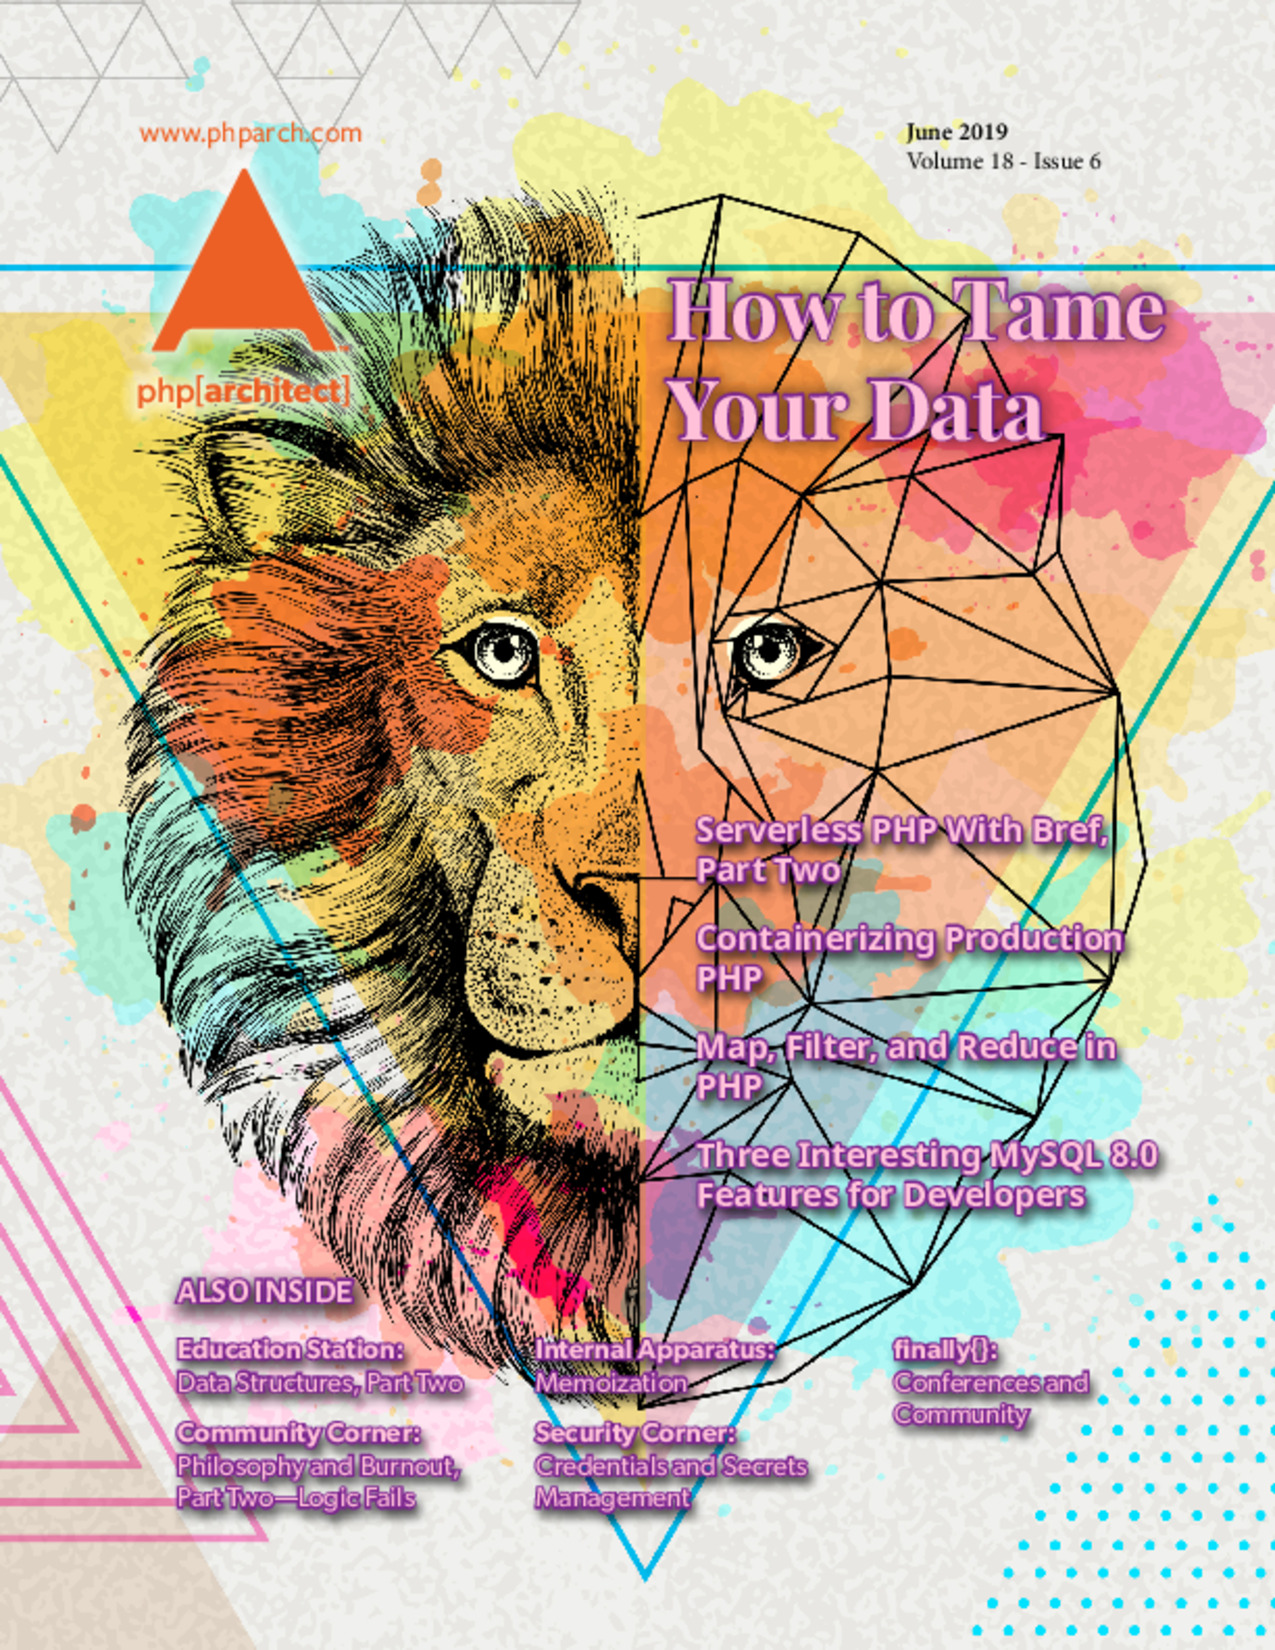 Magazine cover for June 2019 shows a lion drawing